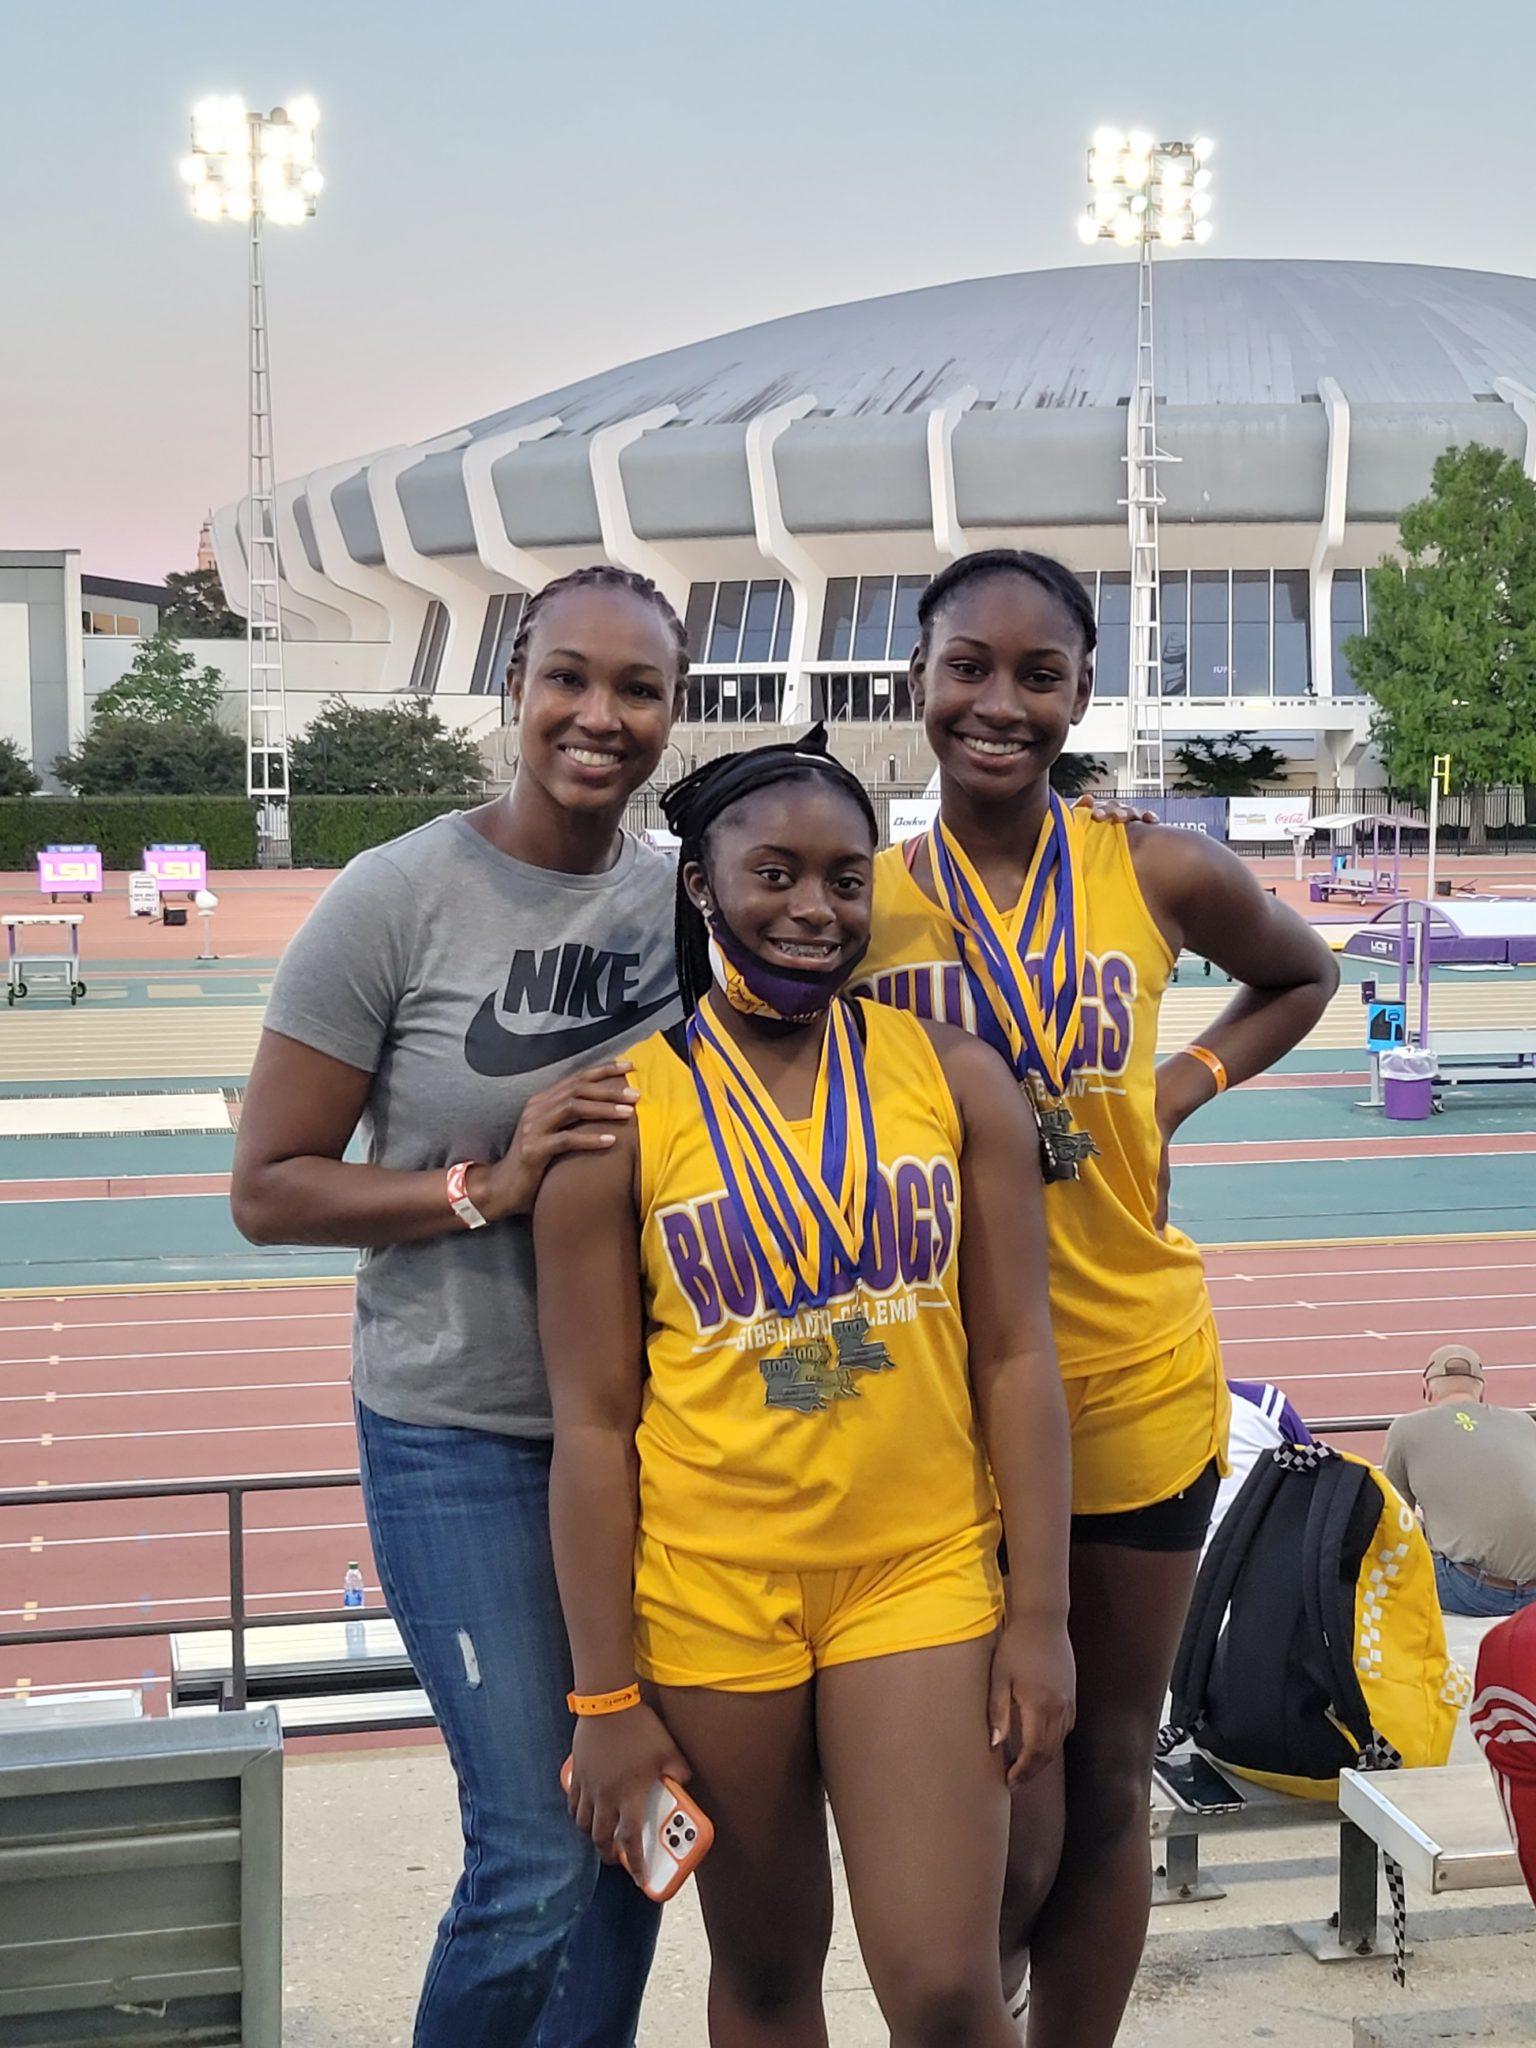 Local Teams Win Big Awards At LHSAA Outdoor Track & Field State Meet